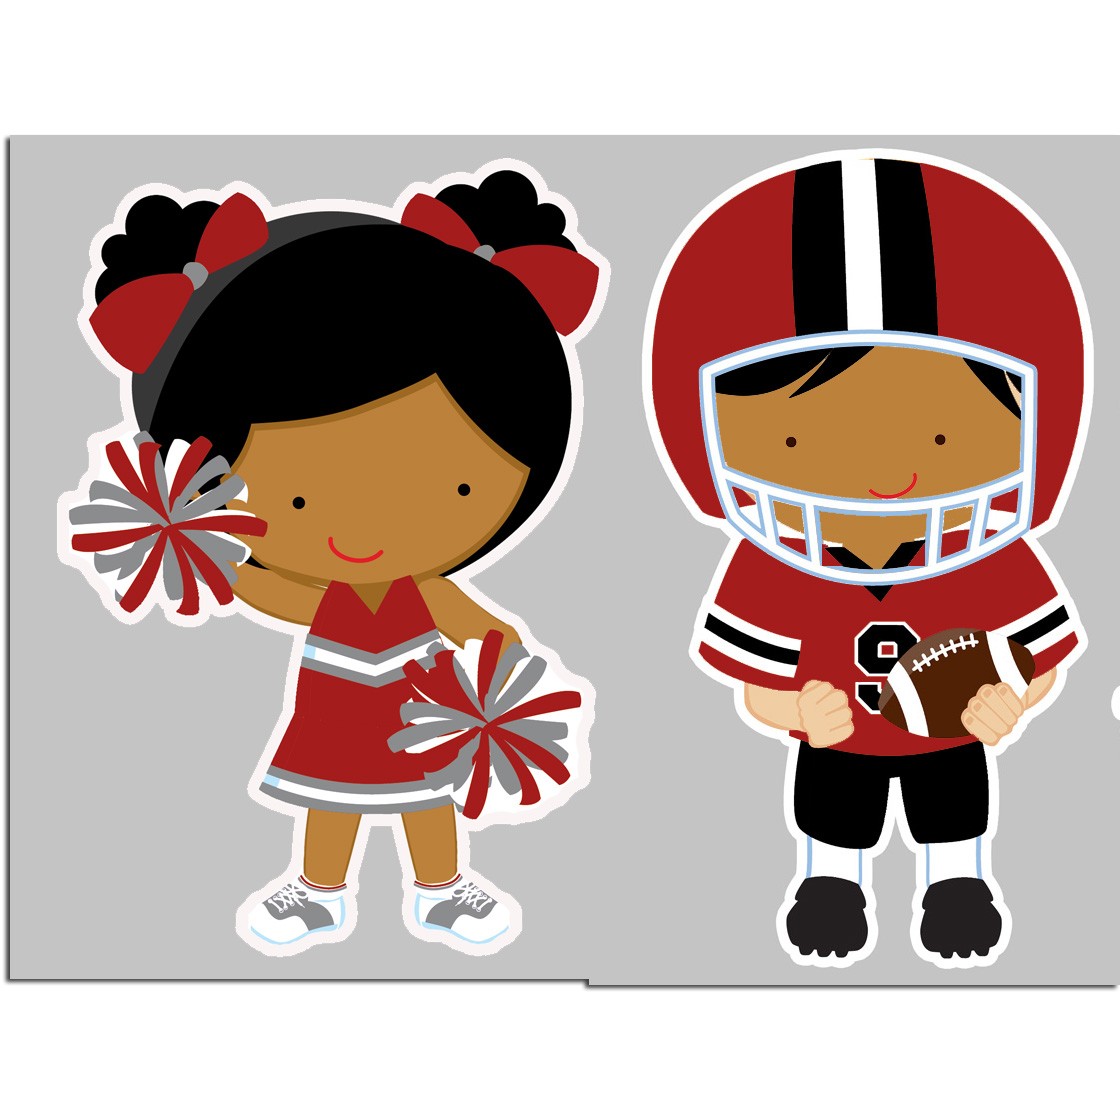 Player personalized centerpiece topper. Cheerleader clipart football